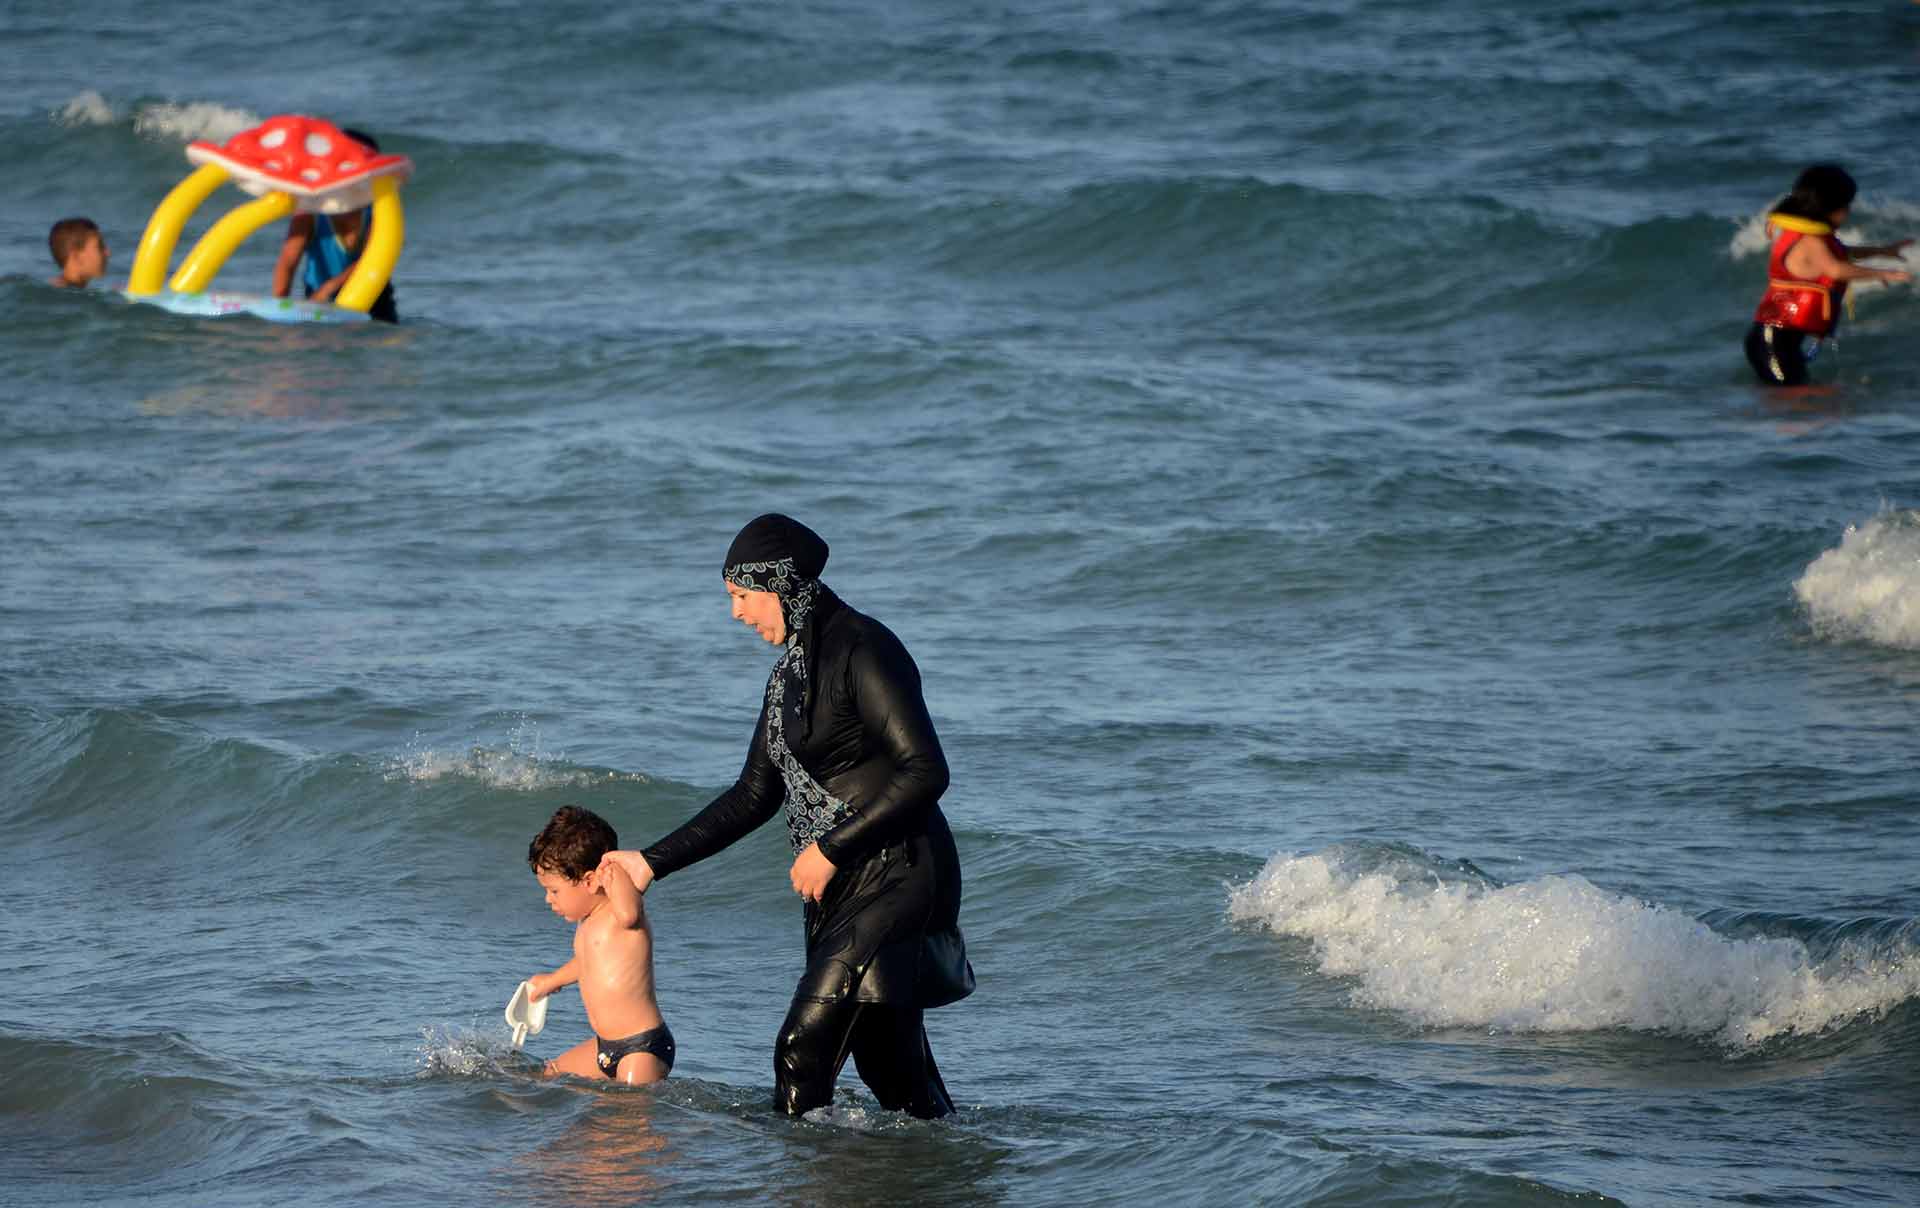 Top French court rules Burkini bans violate basic freedoms